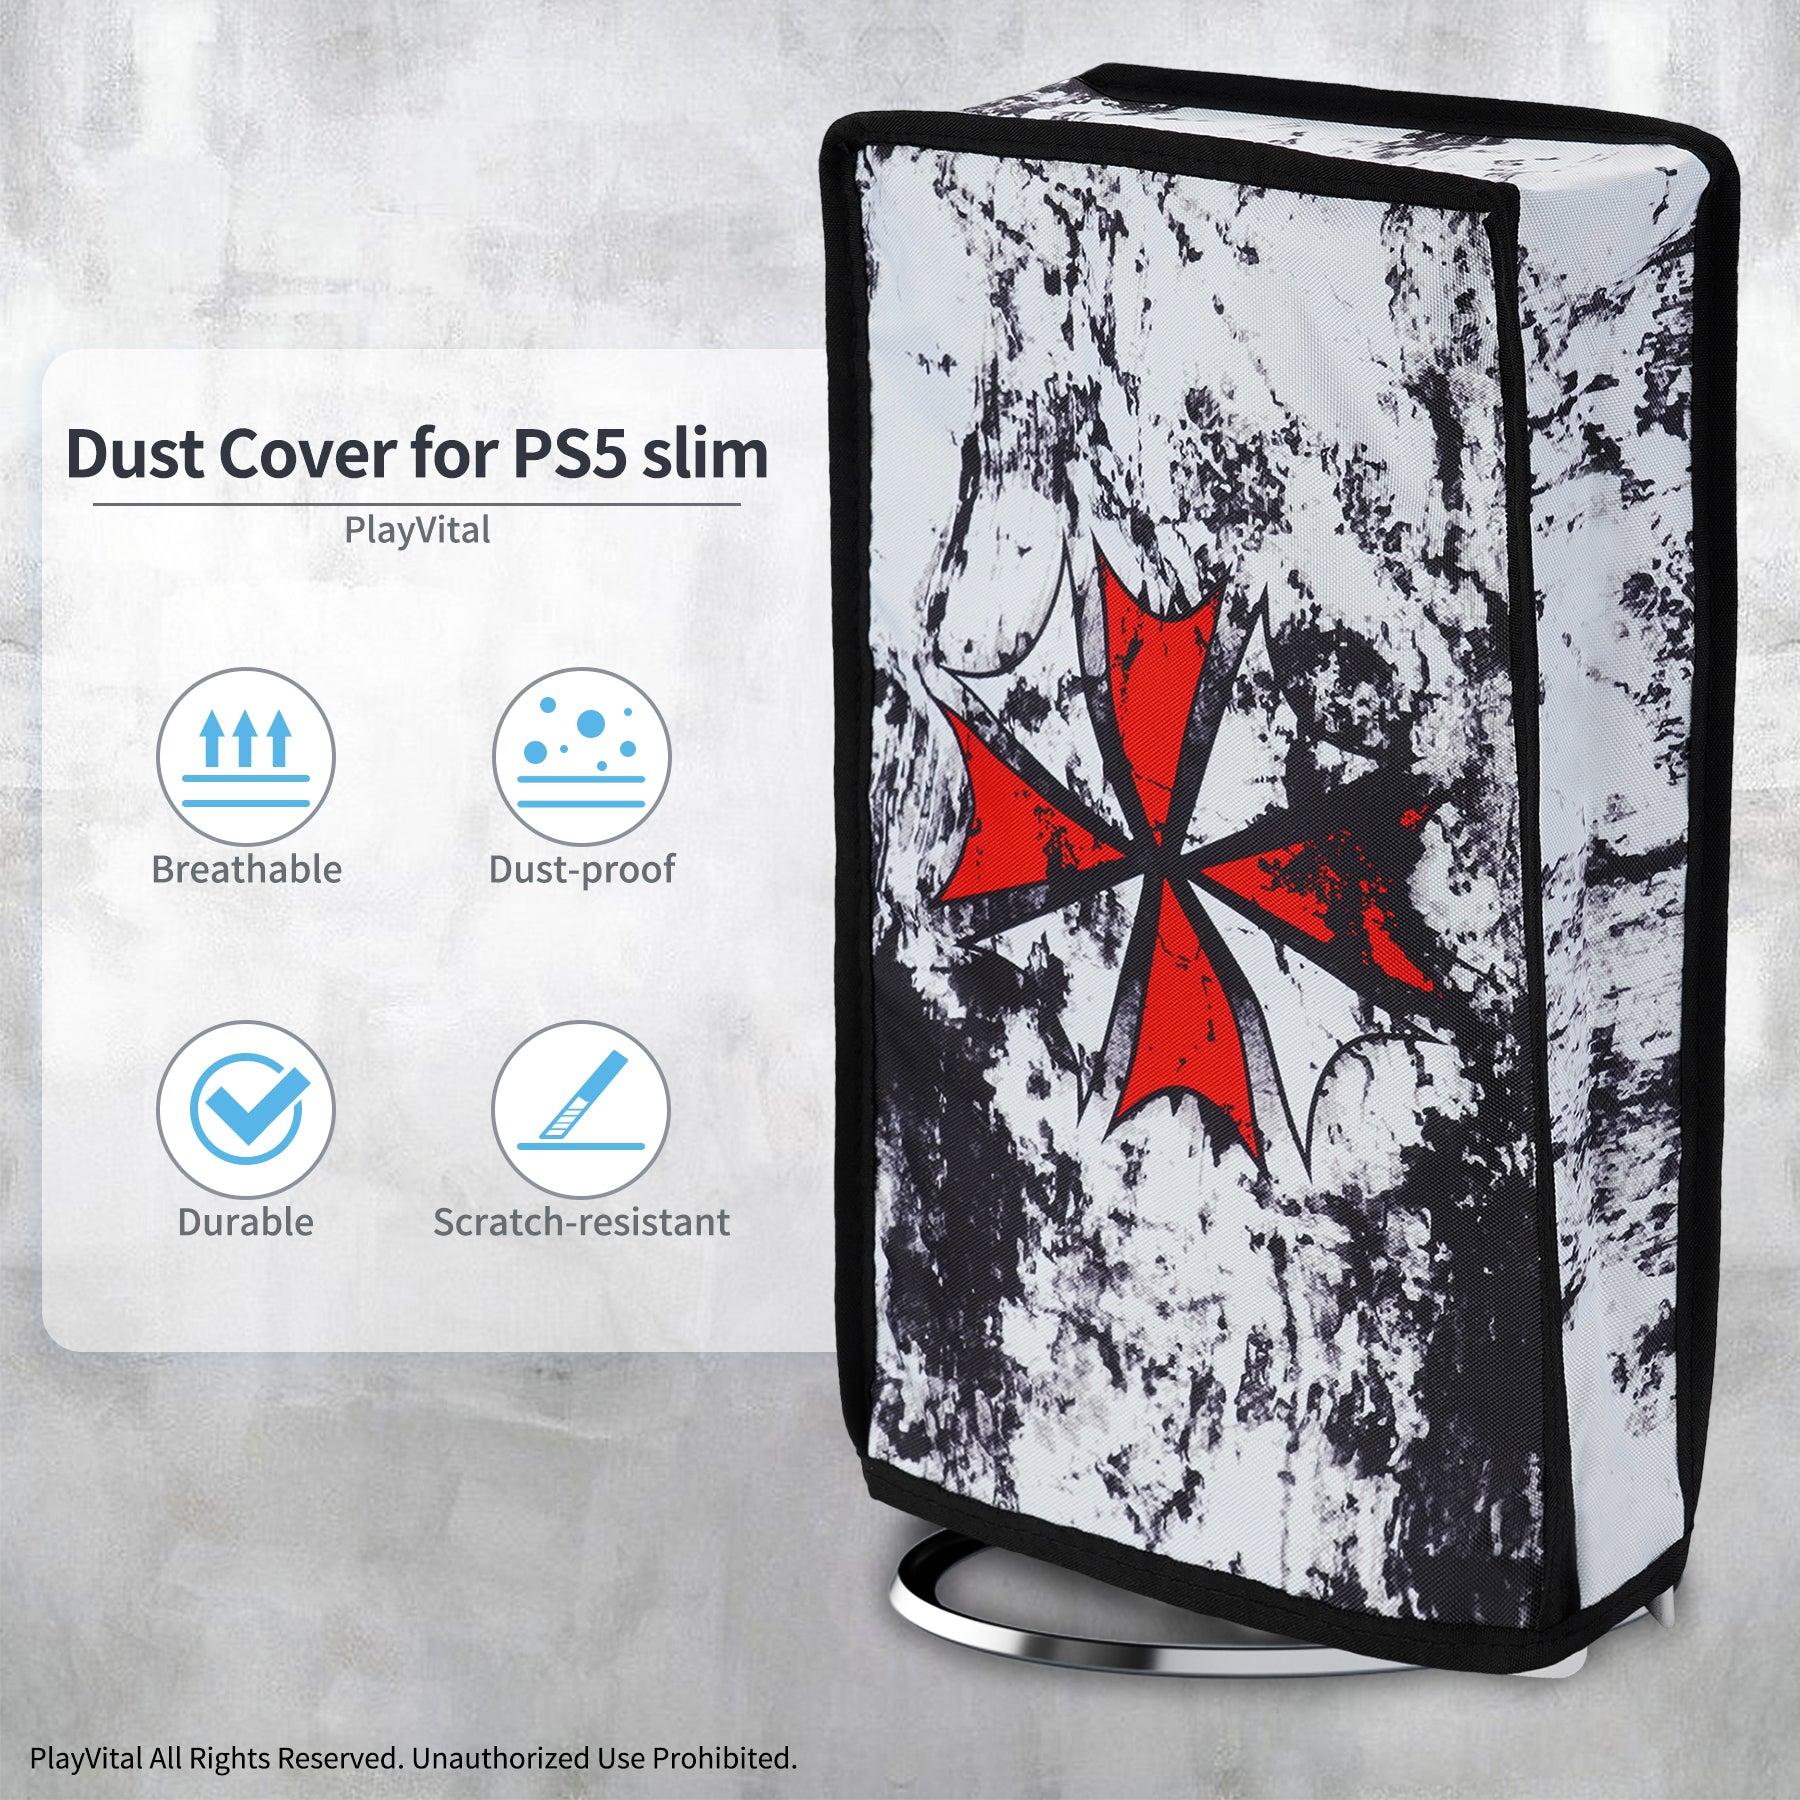 PlayVital Vertical Dust Cover for ps5 Slim Digital Edition(The New Smaller Design), Nylon Dust Proof Protector Waterproof Cover Sleeve for ps5 Slim Console - Biohazard - JKSPFH003 PlayVital